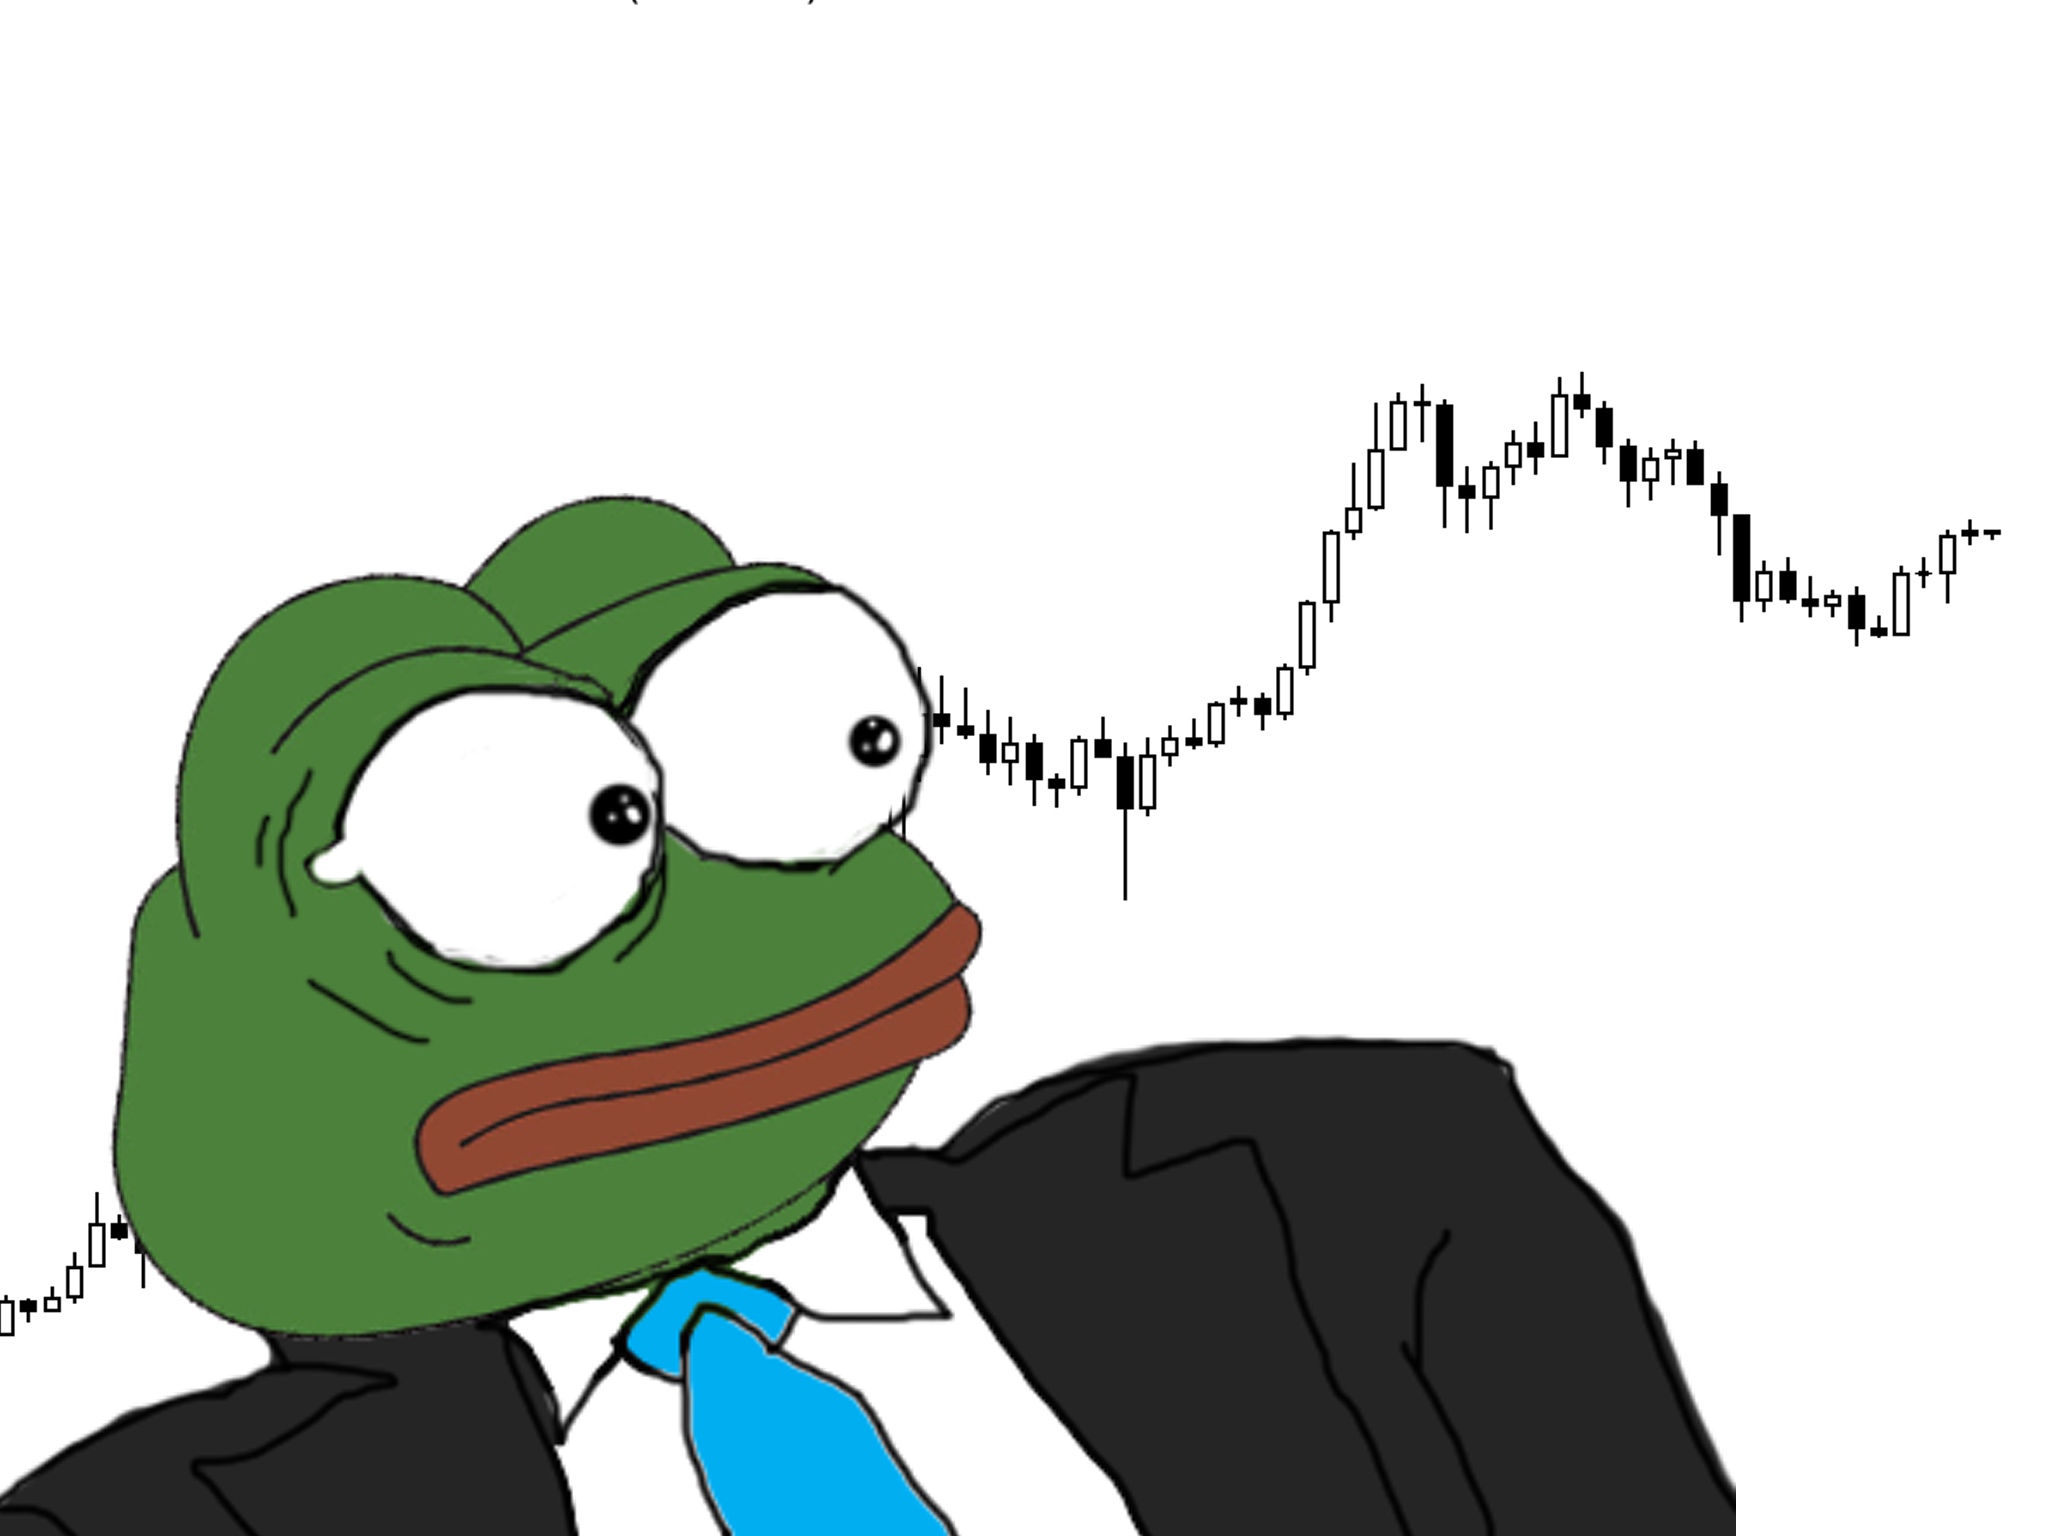 Check out this shocking Pepe coin versus Bitcoin comparison